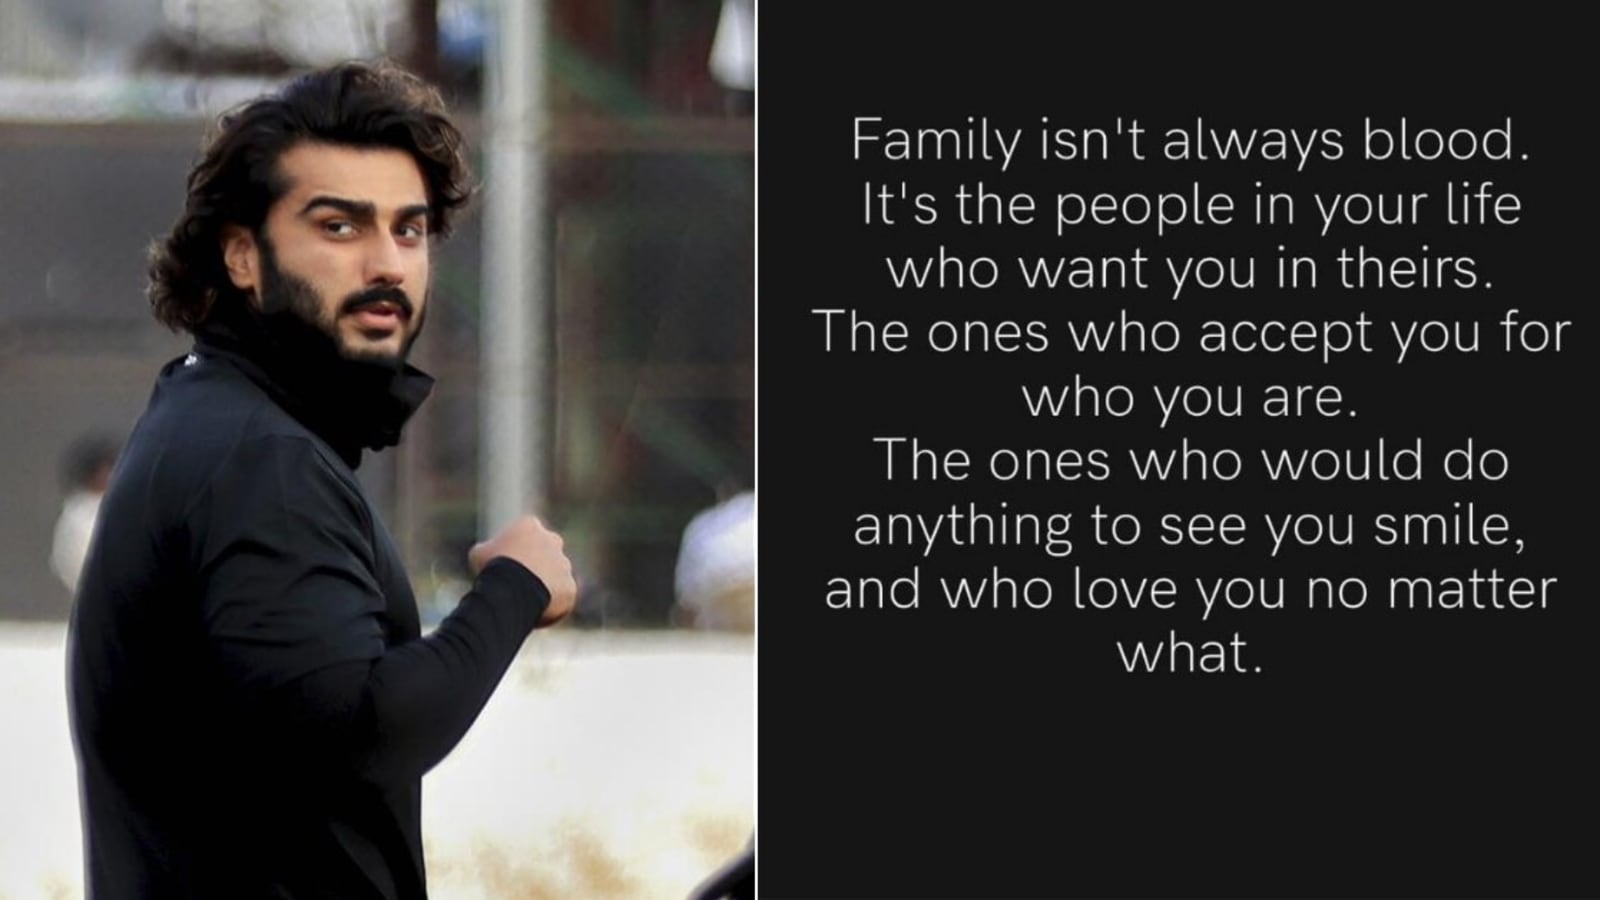 Arjun Kapoor shares cryptic message on Instagram: 'Family isn't always blood'  | Bollywood - Hindustan Times